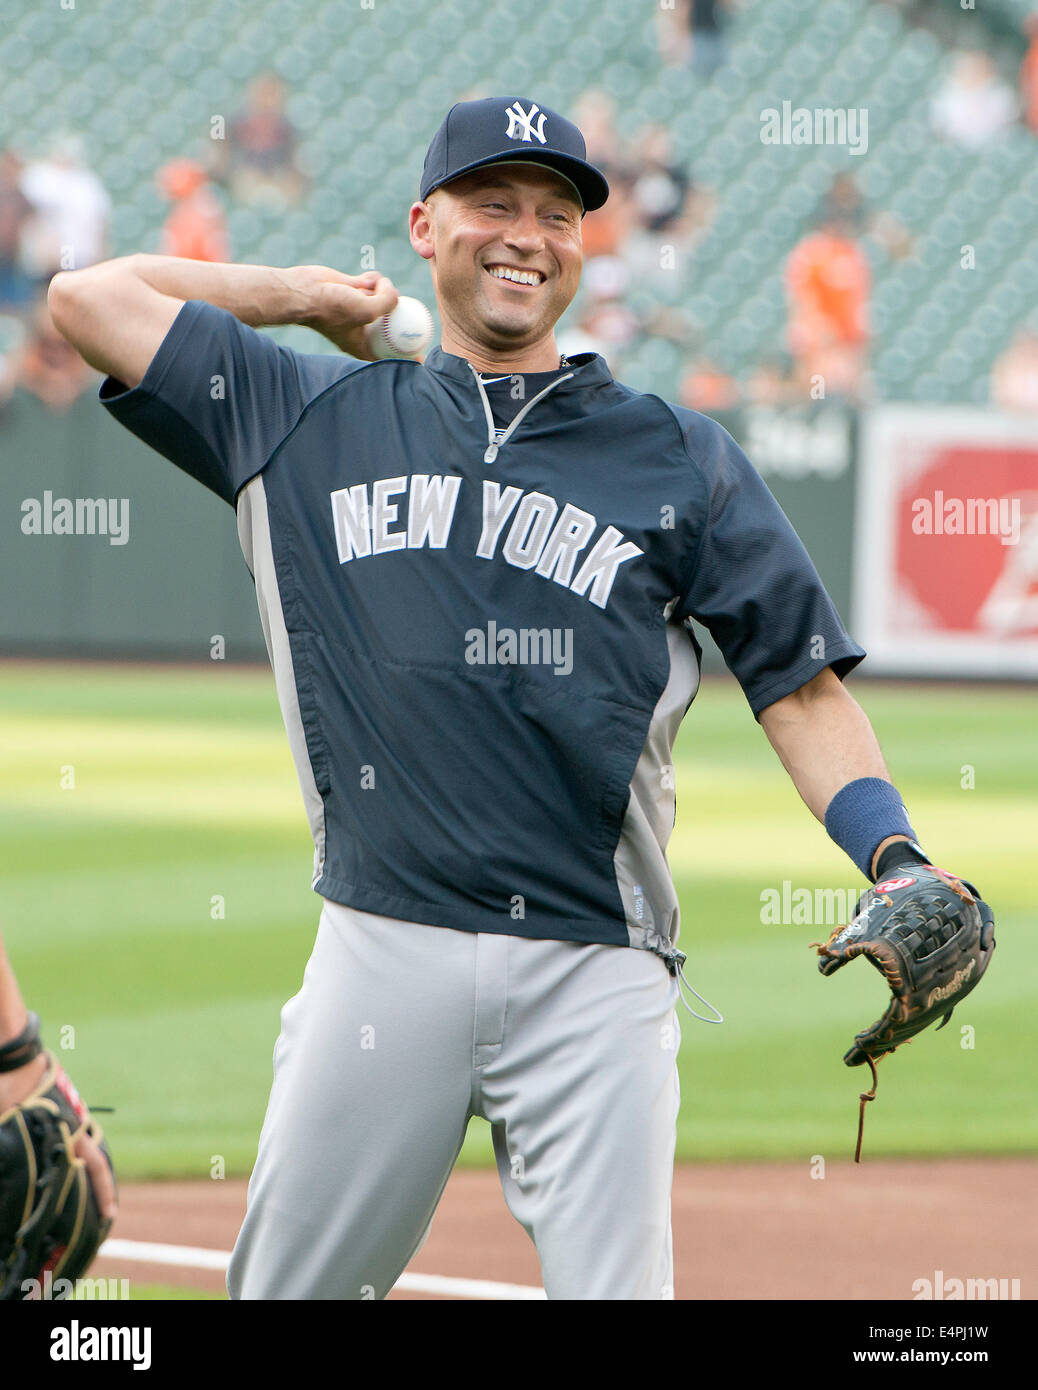 New York Yankees shortstop Derek Jeter (2) tosses the ball as he goes through his warm-up routine prior to the game against the Baltimore Orioles at Oriole Park at Camden Yards in Baltimore, MD on Sunday, July 13, 2014. The Yankees won the game 3 - 0. Credit: Ron Sachs/CNP (:. RESTRICTION: NO New York or New Jersey Newspapers or newspapers within a 75 mile radius of New York City) - NO WIRE SERVICE Stock Photo